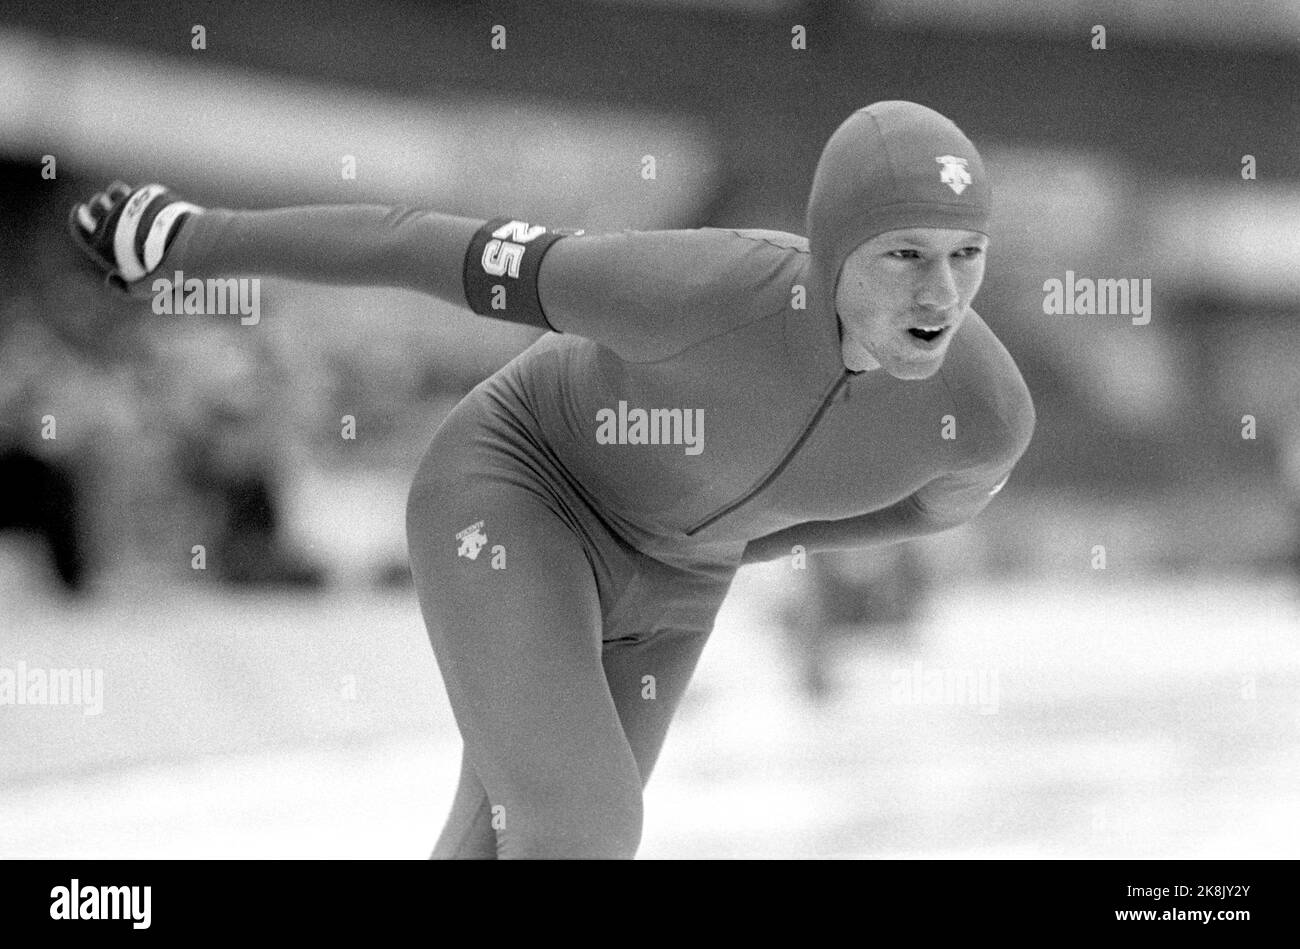 5000m photo Black and White Stock Photos & Images - Alamy